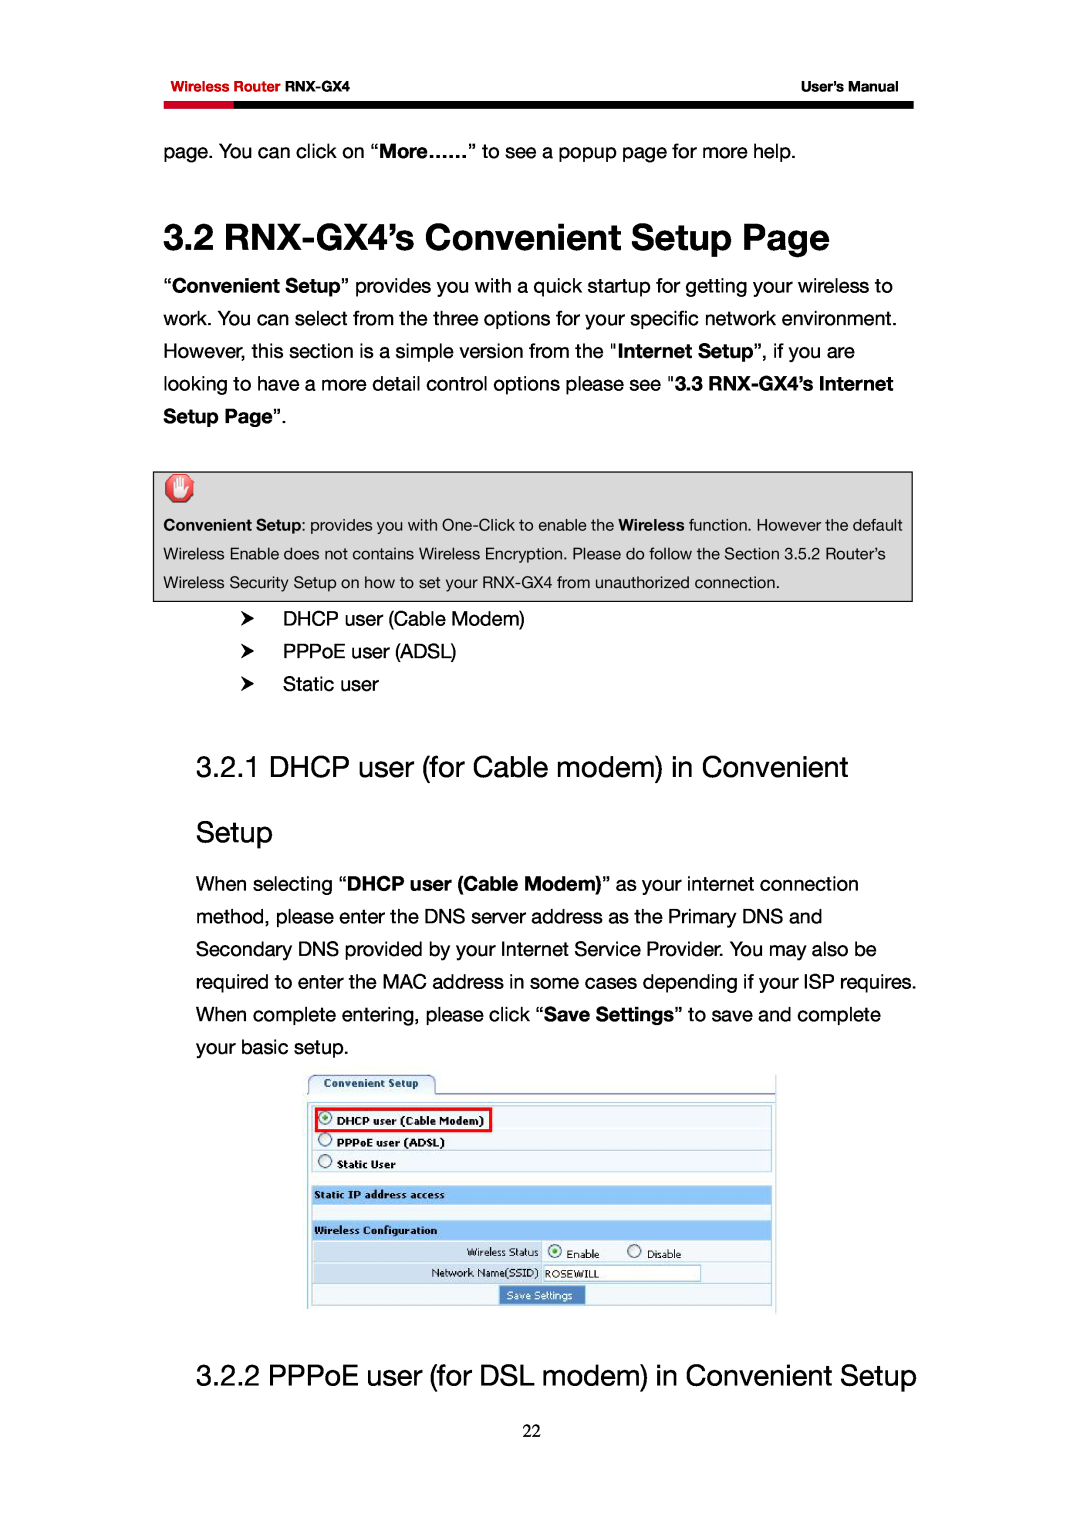 Rosewill user manual RNX-GX4’s Convenient Setup Page, DHCP user for Cable modem in Convenient Setup 